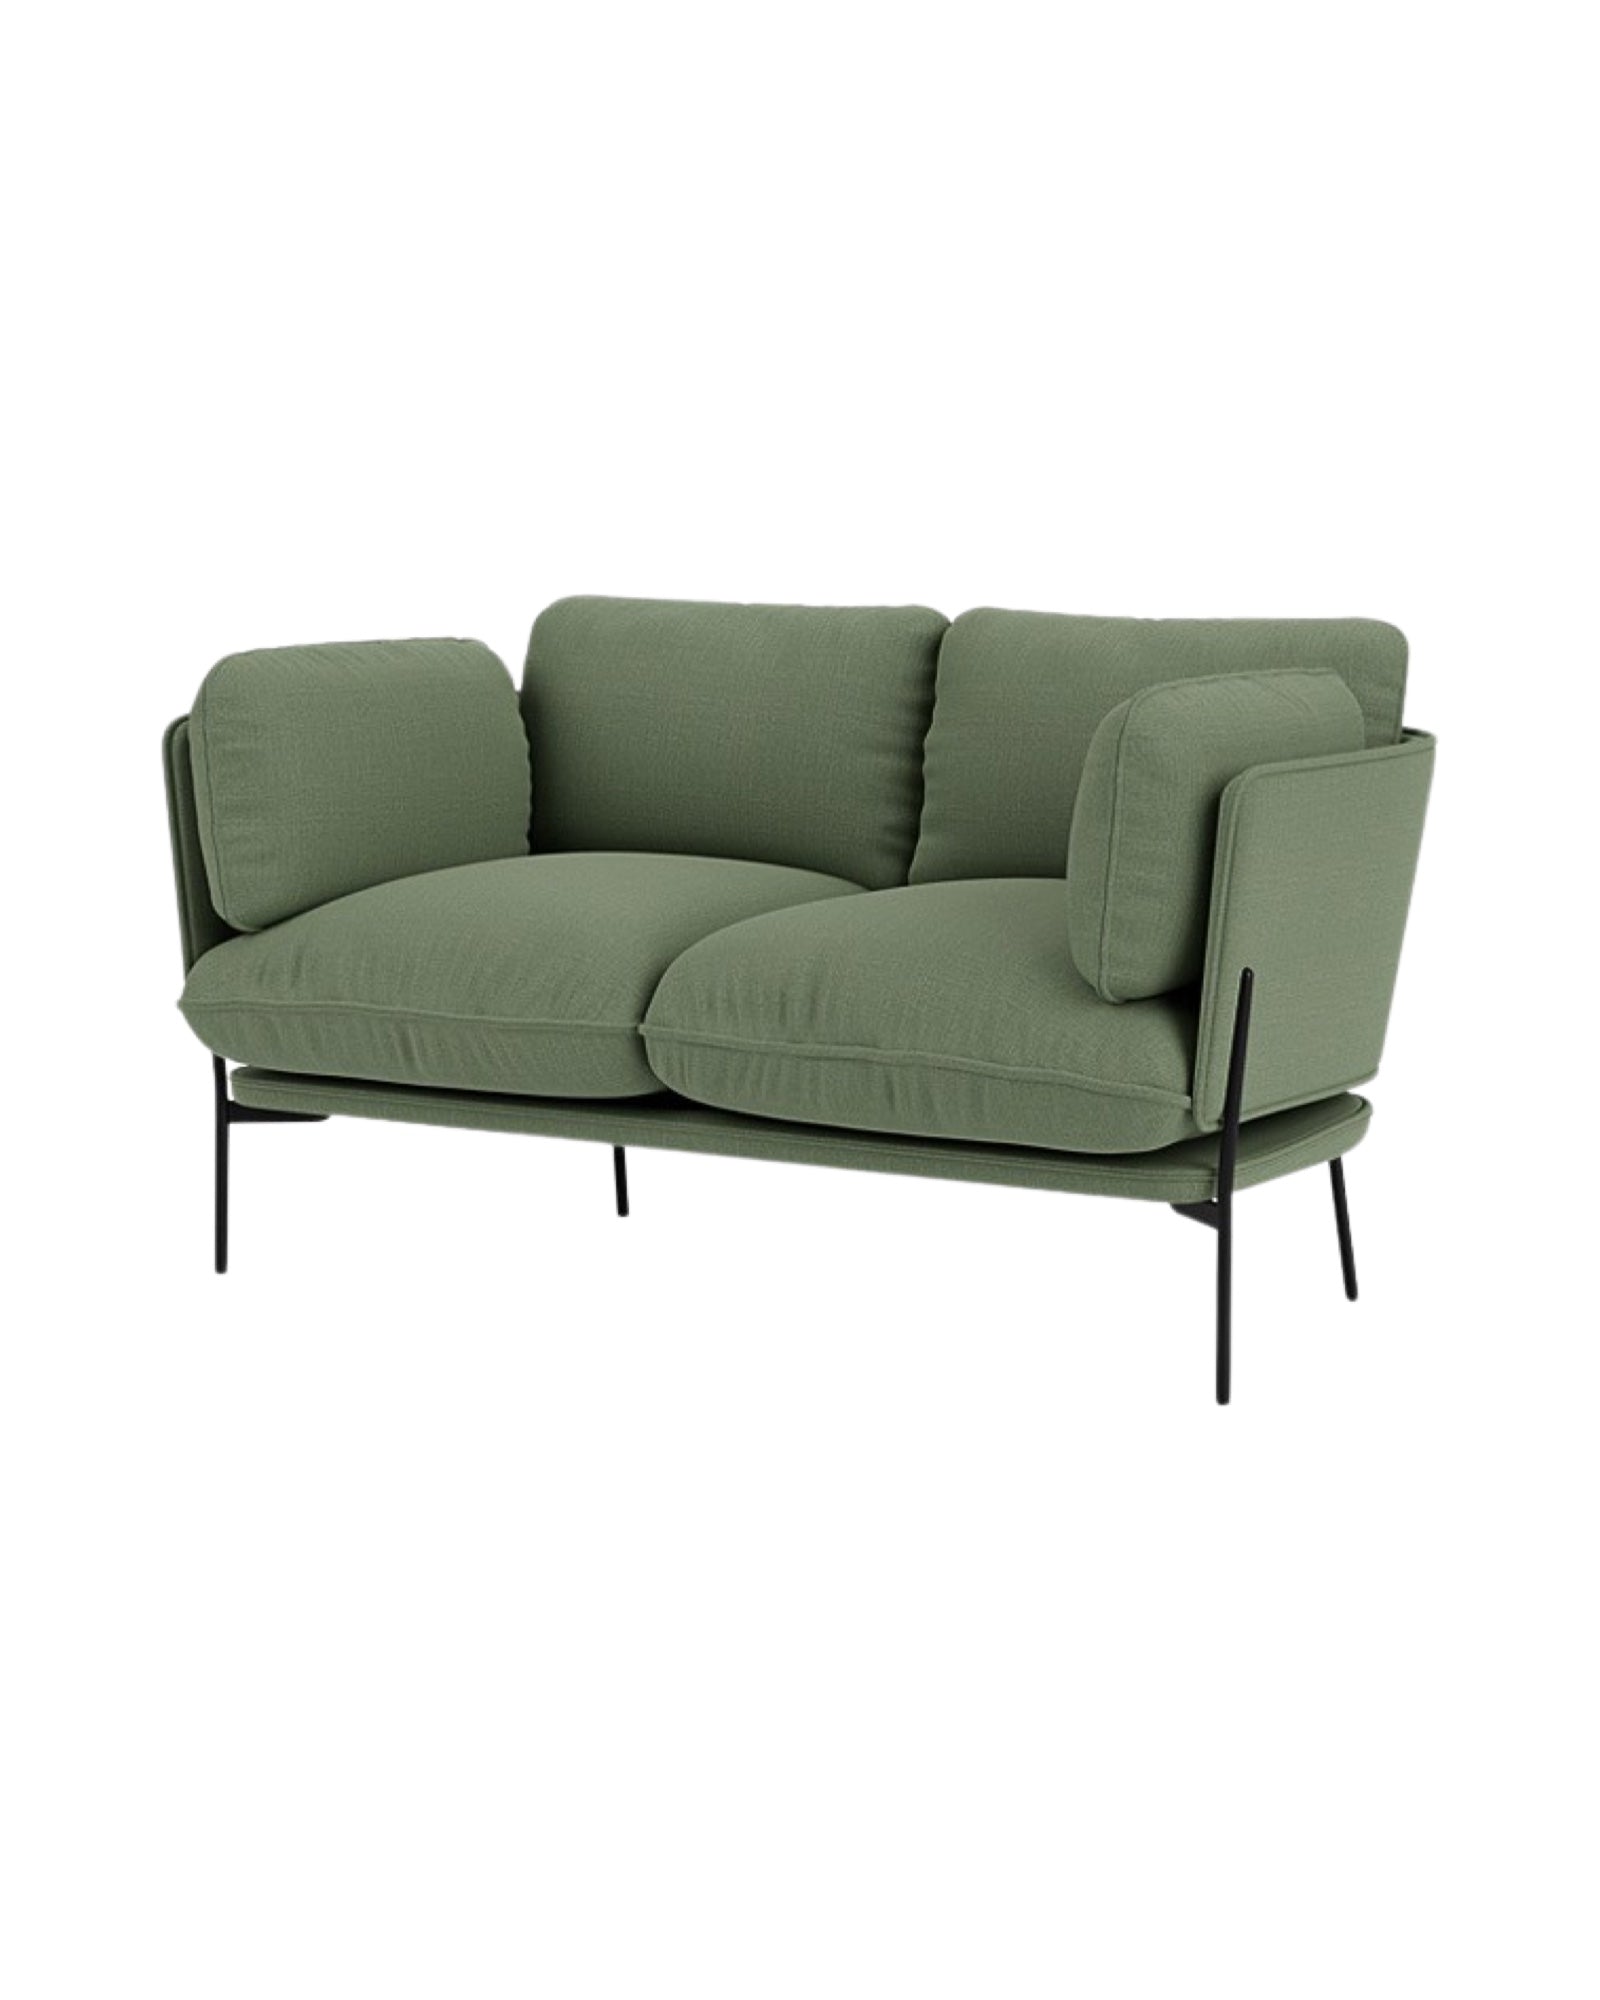 &Tradition Cloud LN2 2 Seater Sofa